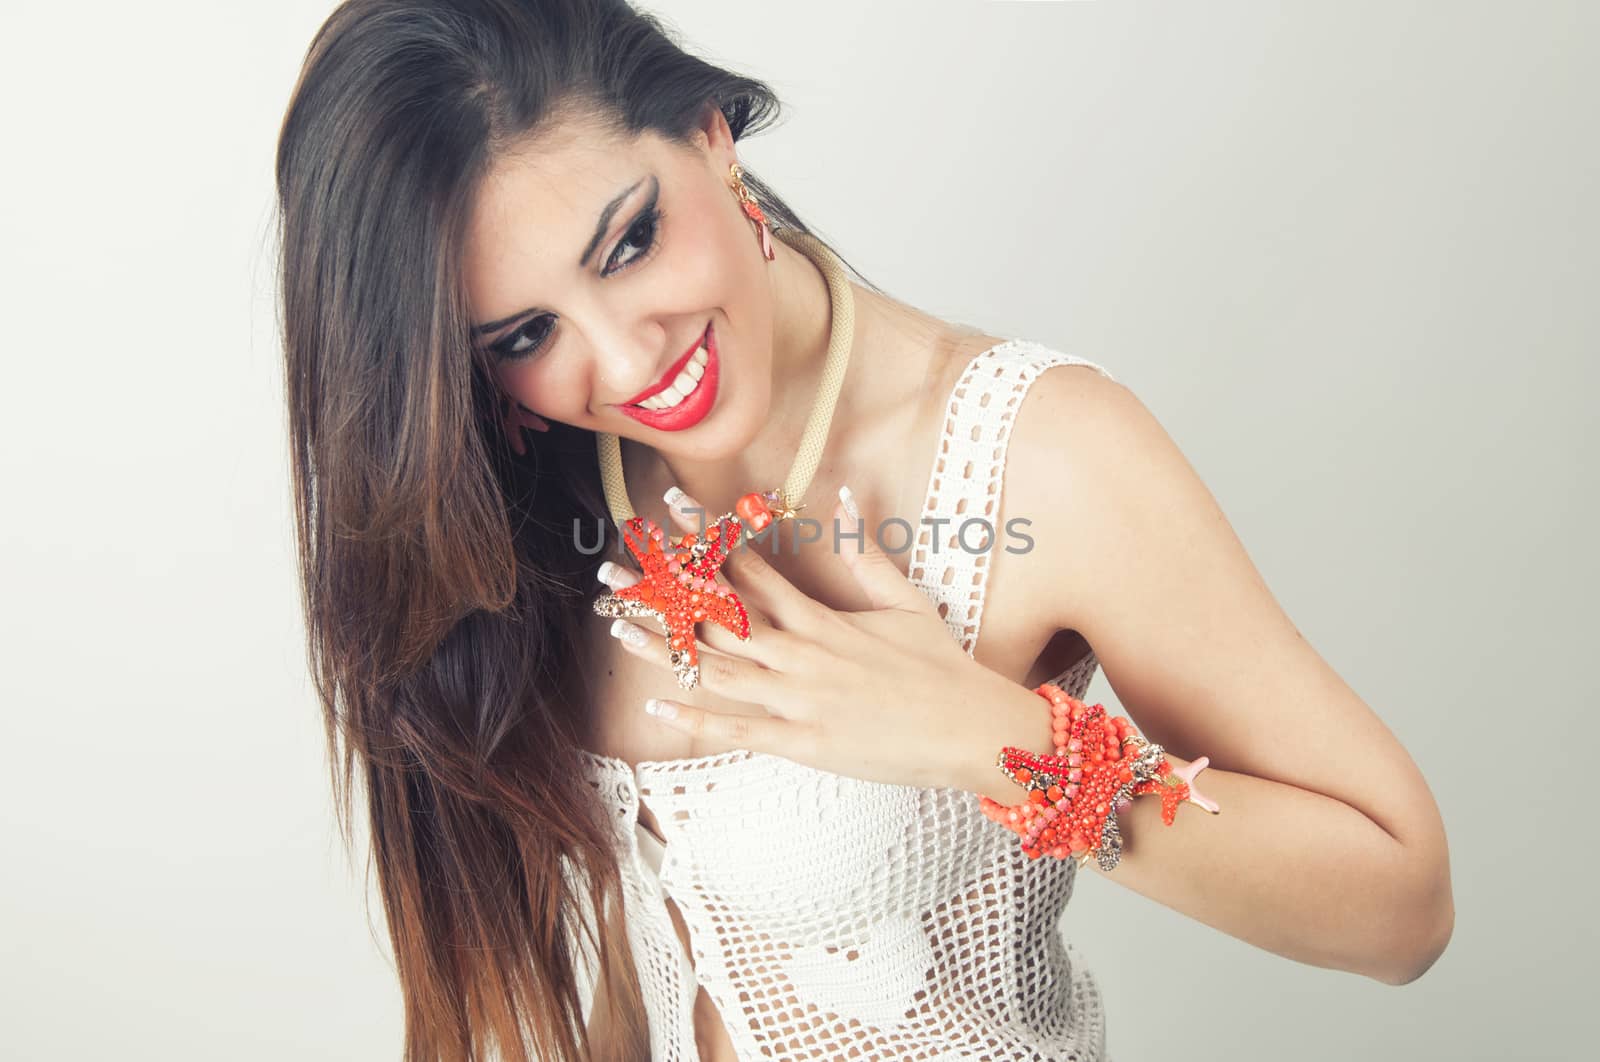 Woman smiling with perfect smile wearing  jewlry